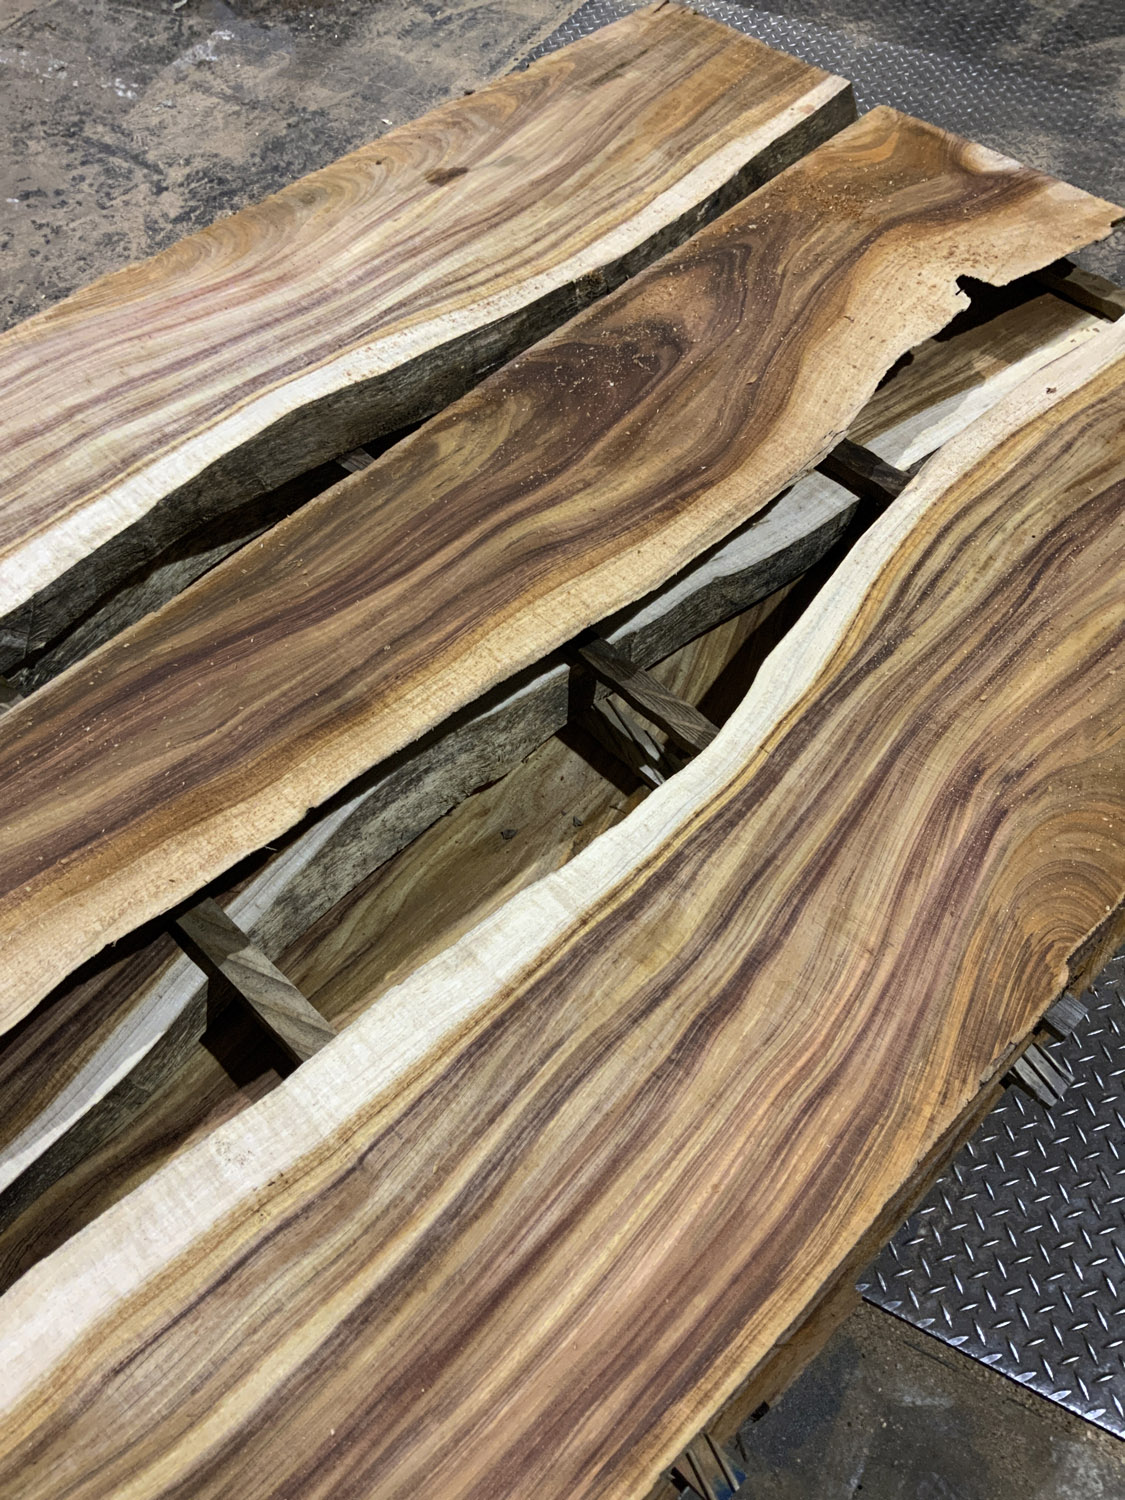 Some pretty things have passed through the sawmill this past month- Black Walnut, Big Leaf Maple, Tasmanian Blackwood, Eucalyptus.... Please keep in mind that this material is green/ drying